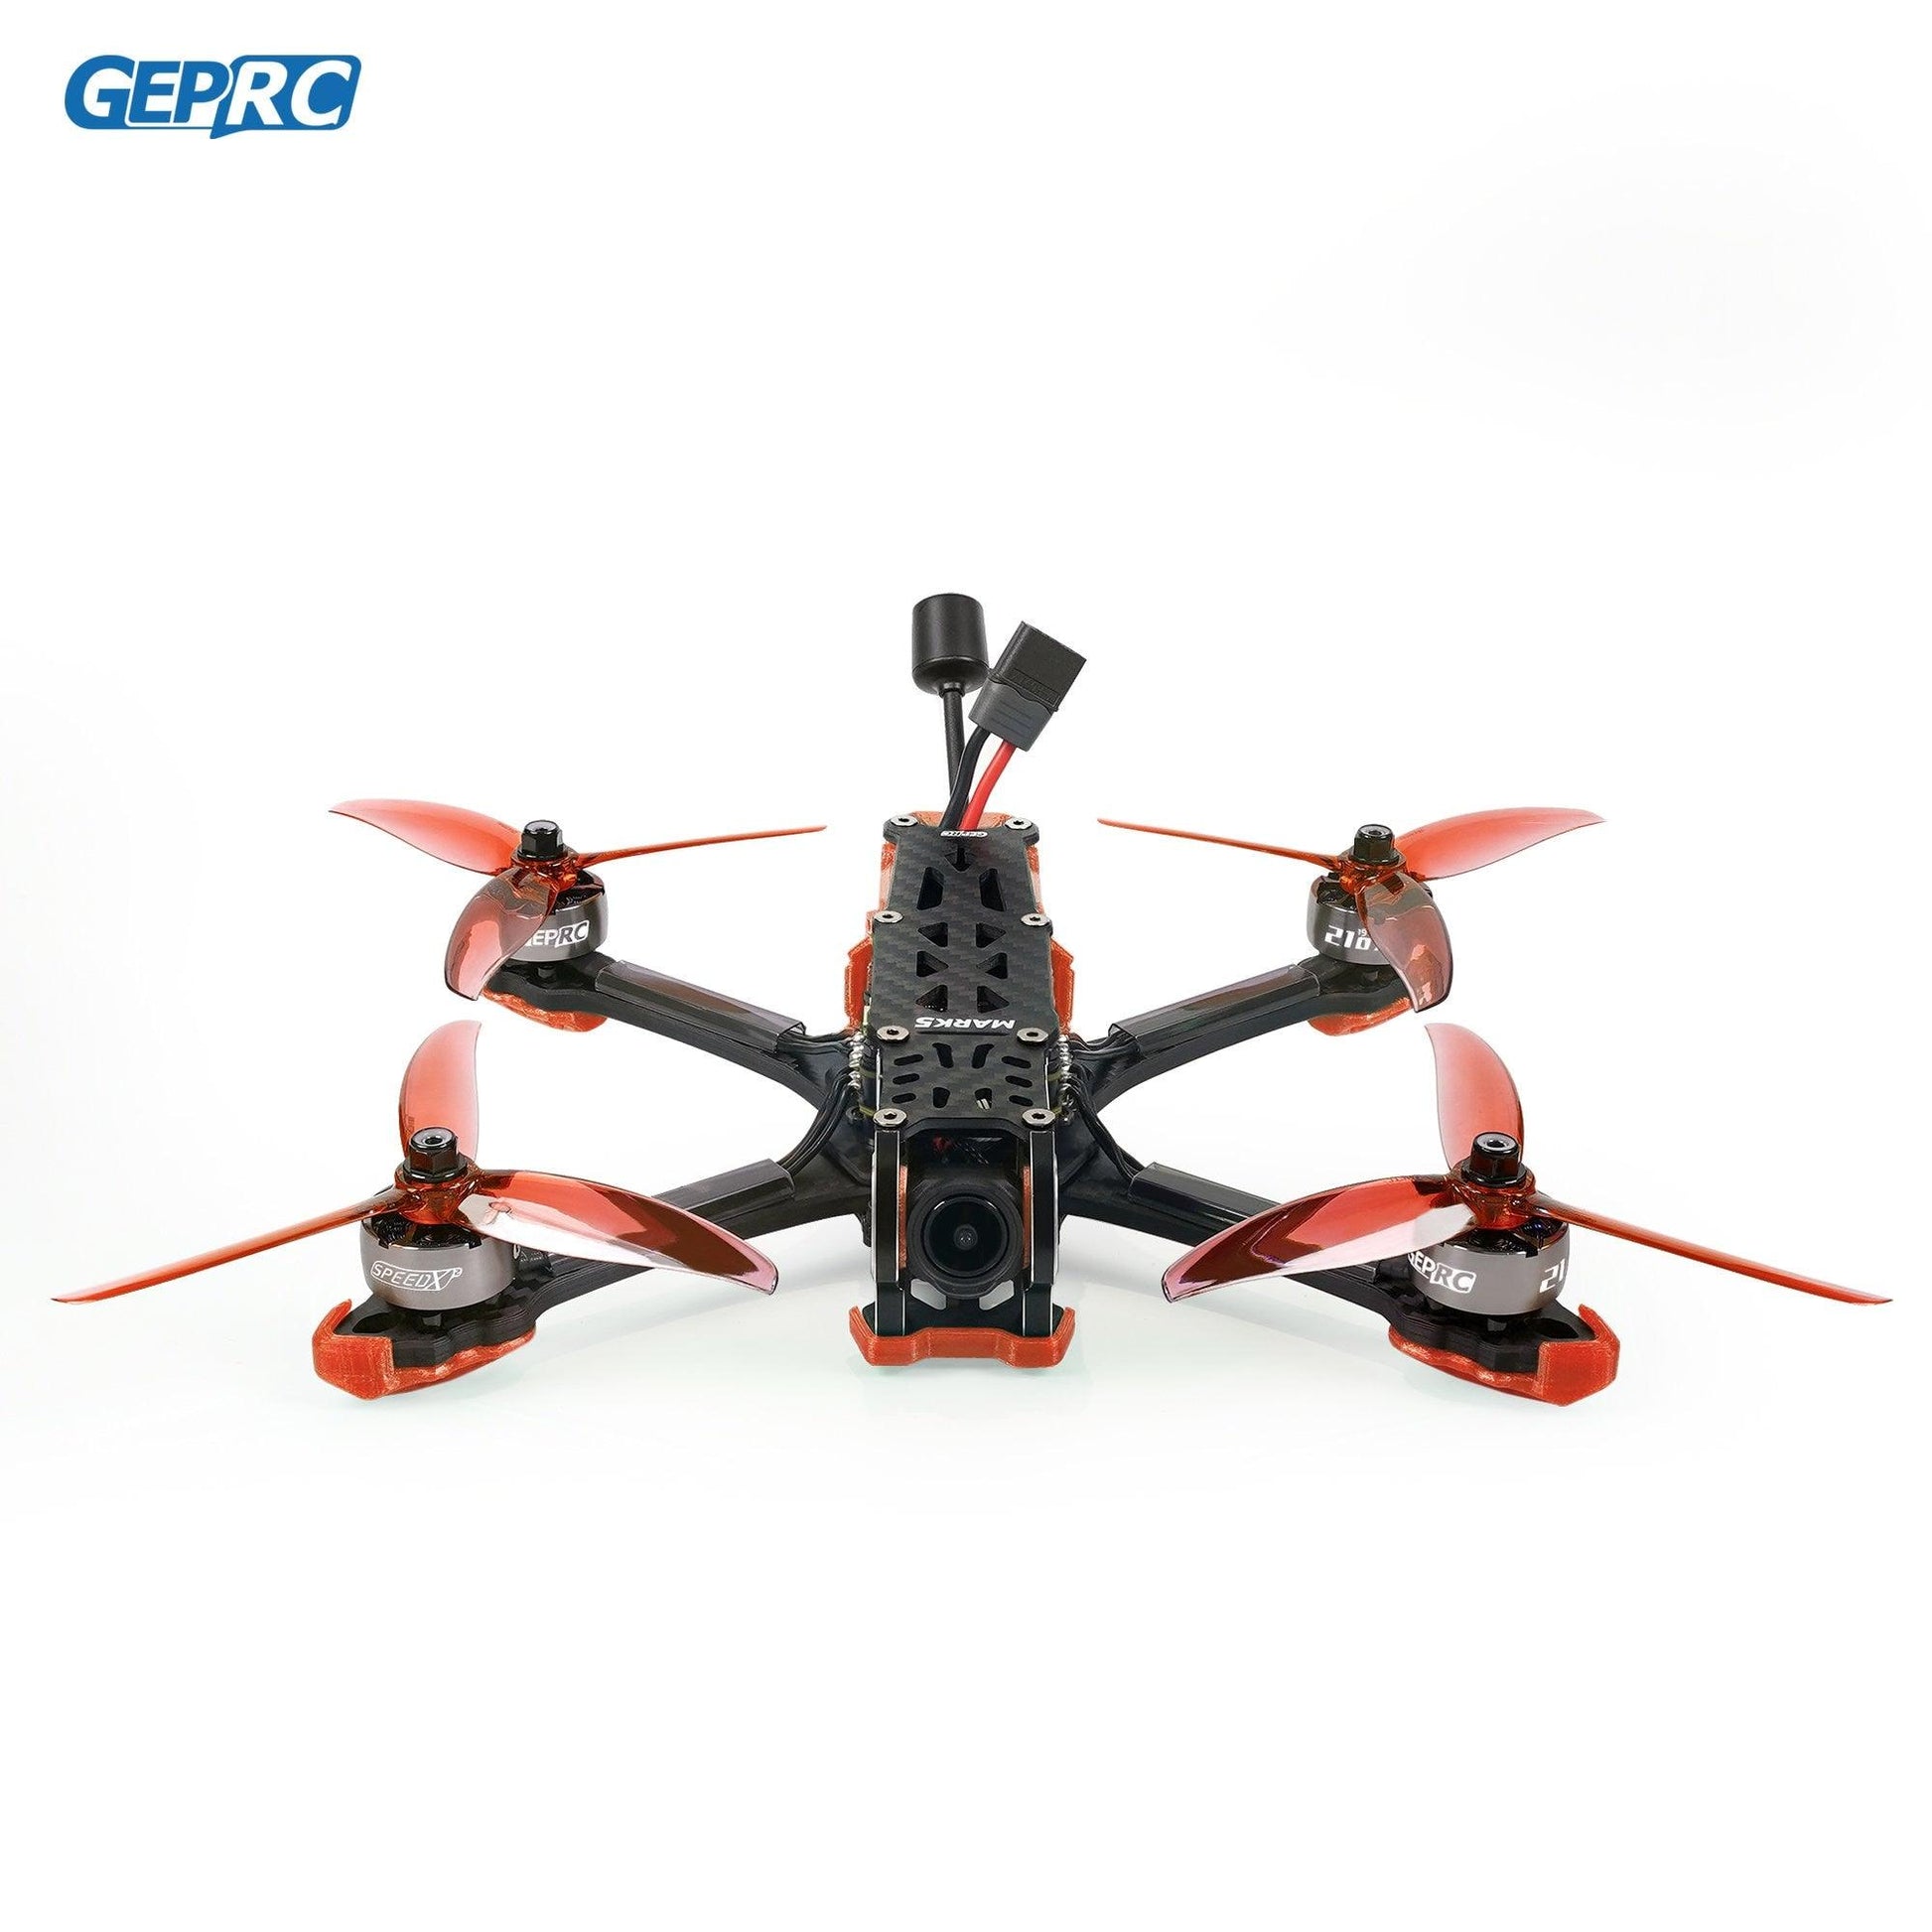 GEPRC MARK5 HD O3 Freestyle FPV Drone - Orange System 6S New VTX O3 Air Unit for RC FPV Bluetooth Quadcopter Freestyle Drone - RCDrone